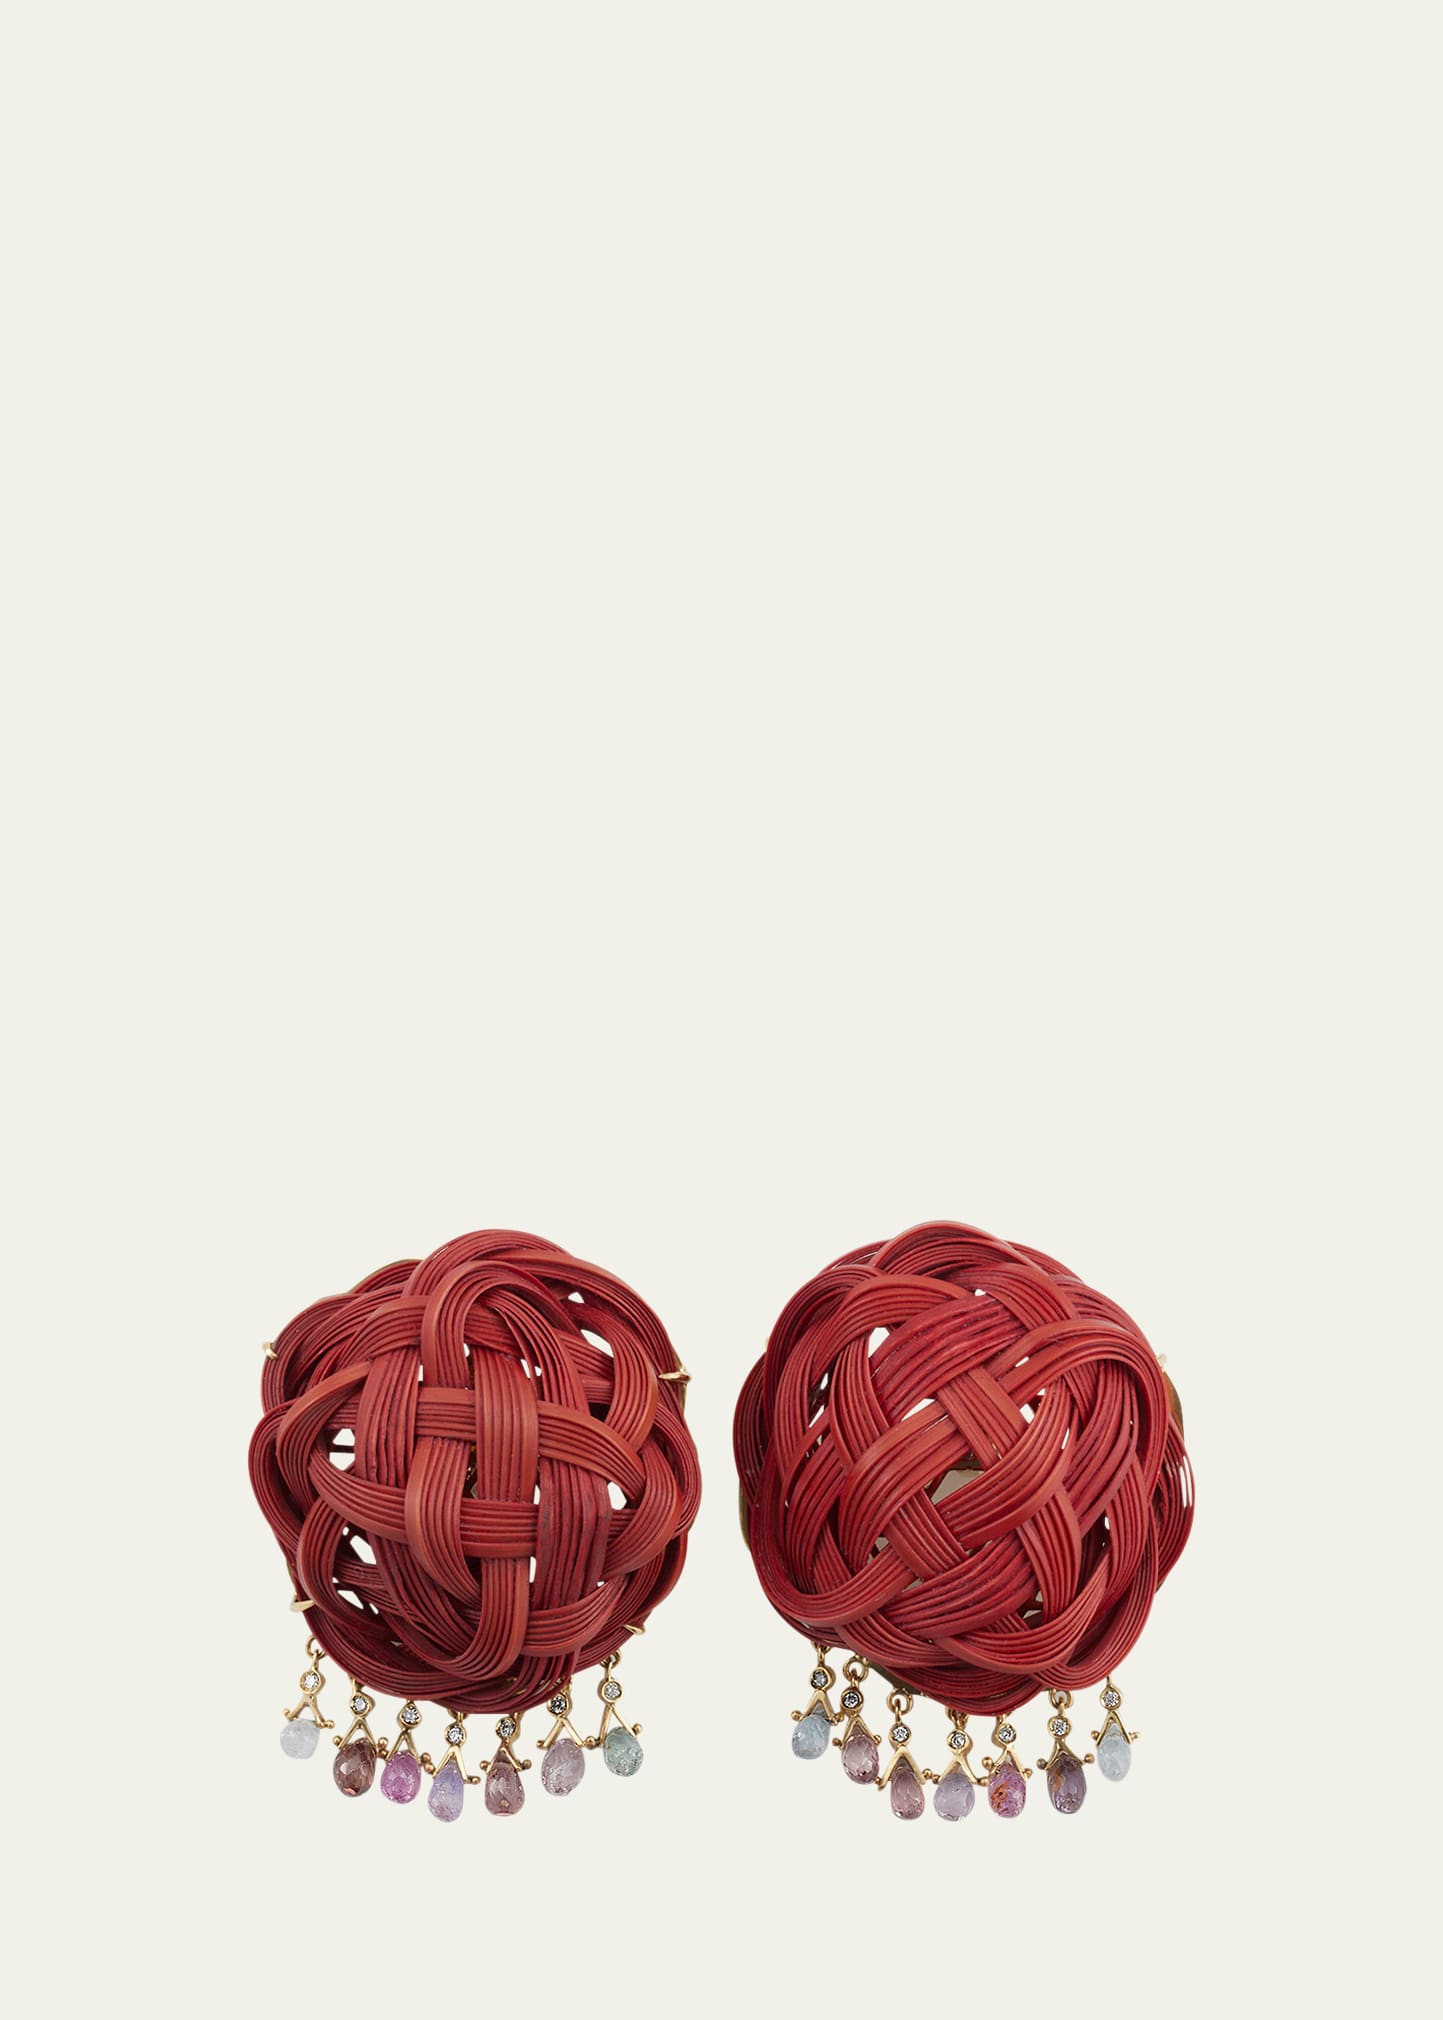 18K Yellow Gold Earrings with Diamonds, Spinel and Bamboo